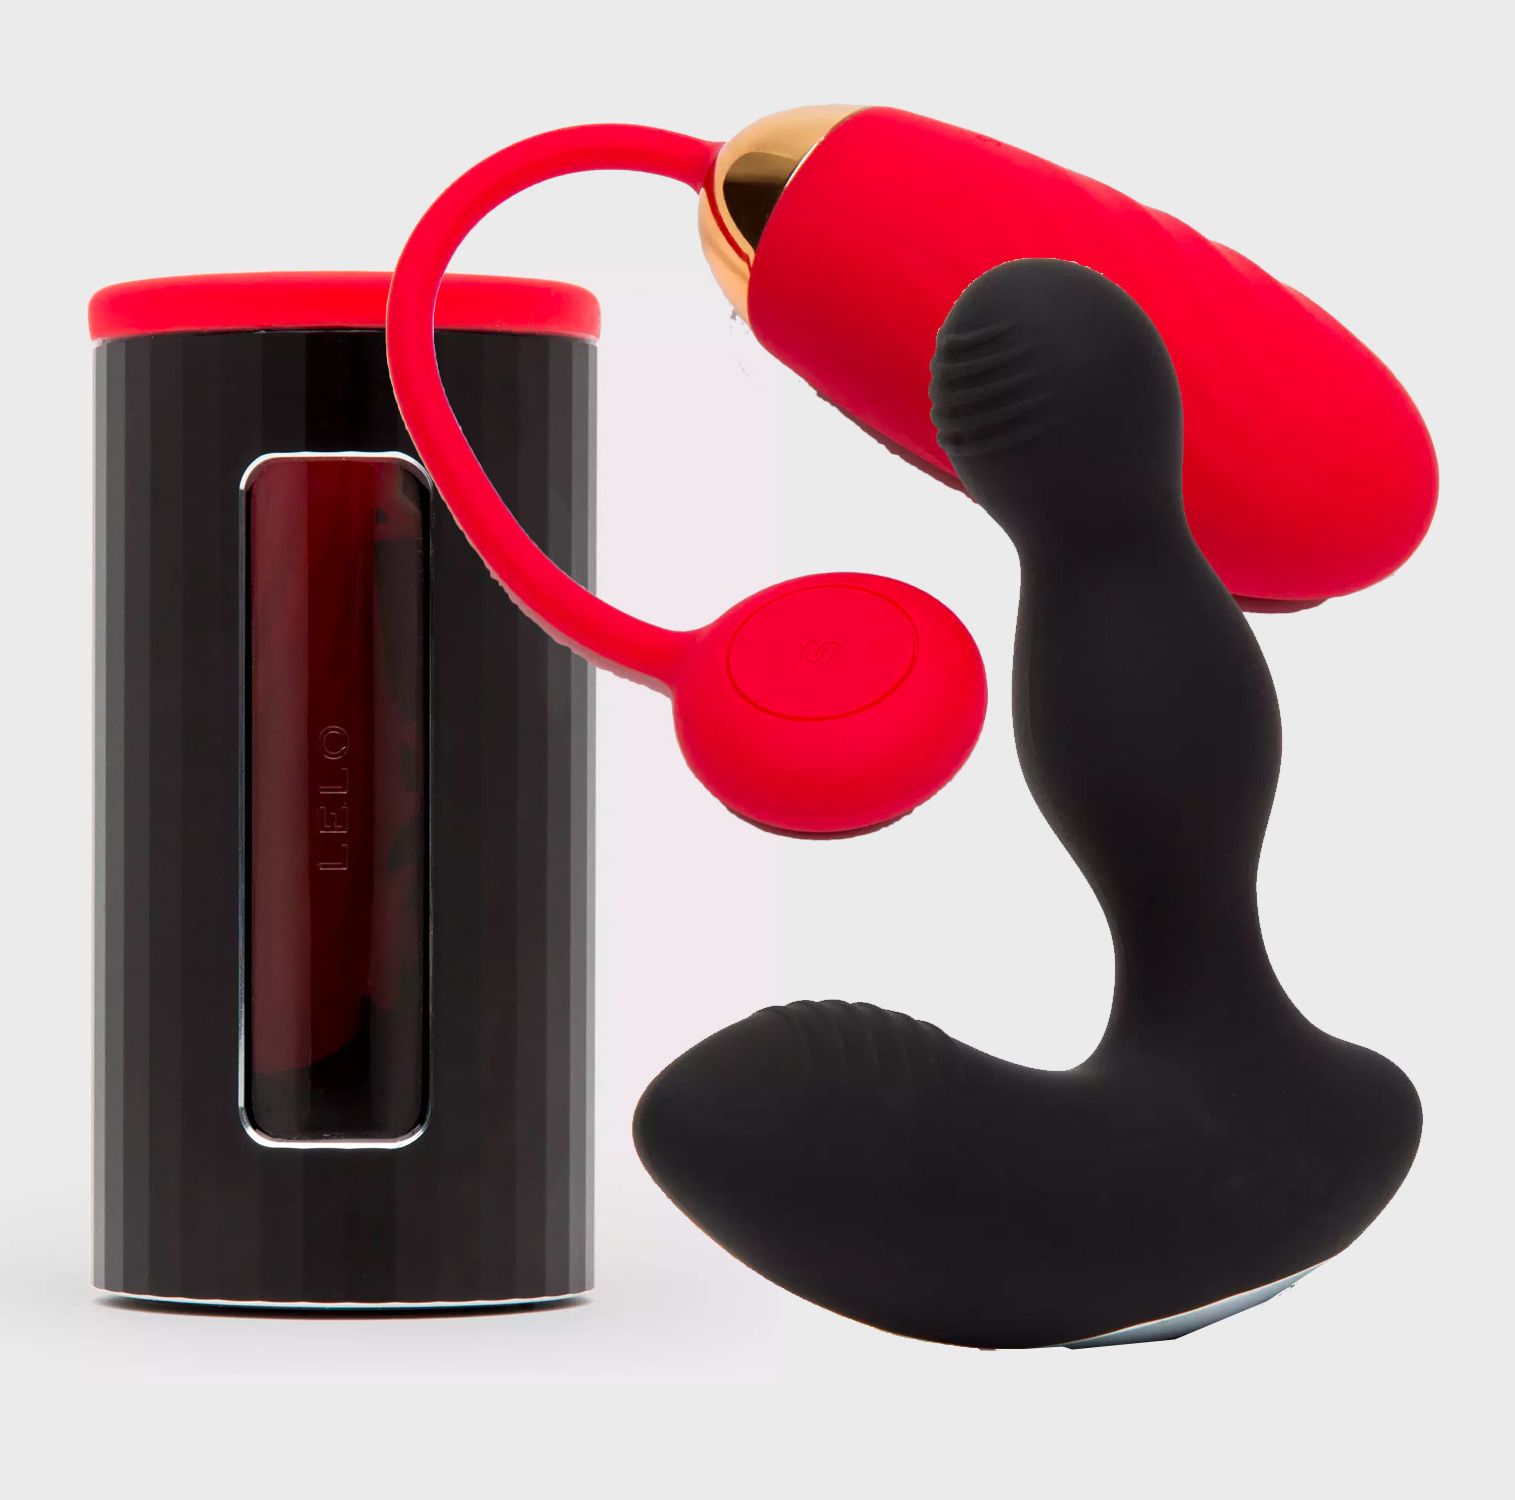 Save Up to 70% (and Over) on Lovehoney's Sex Toys, Lingerie and More